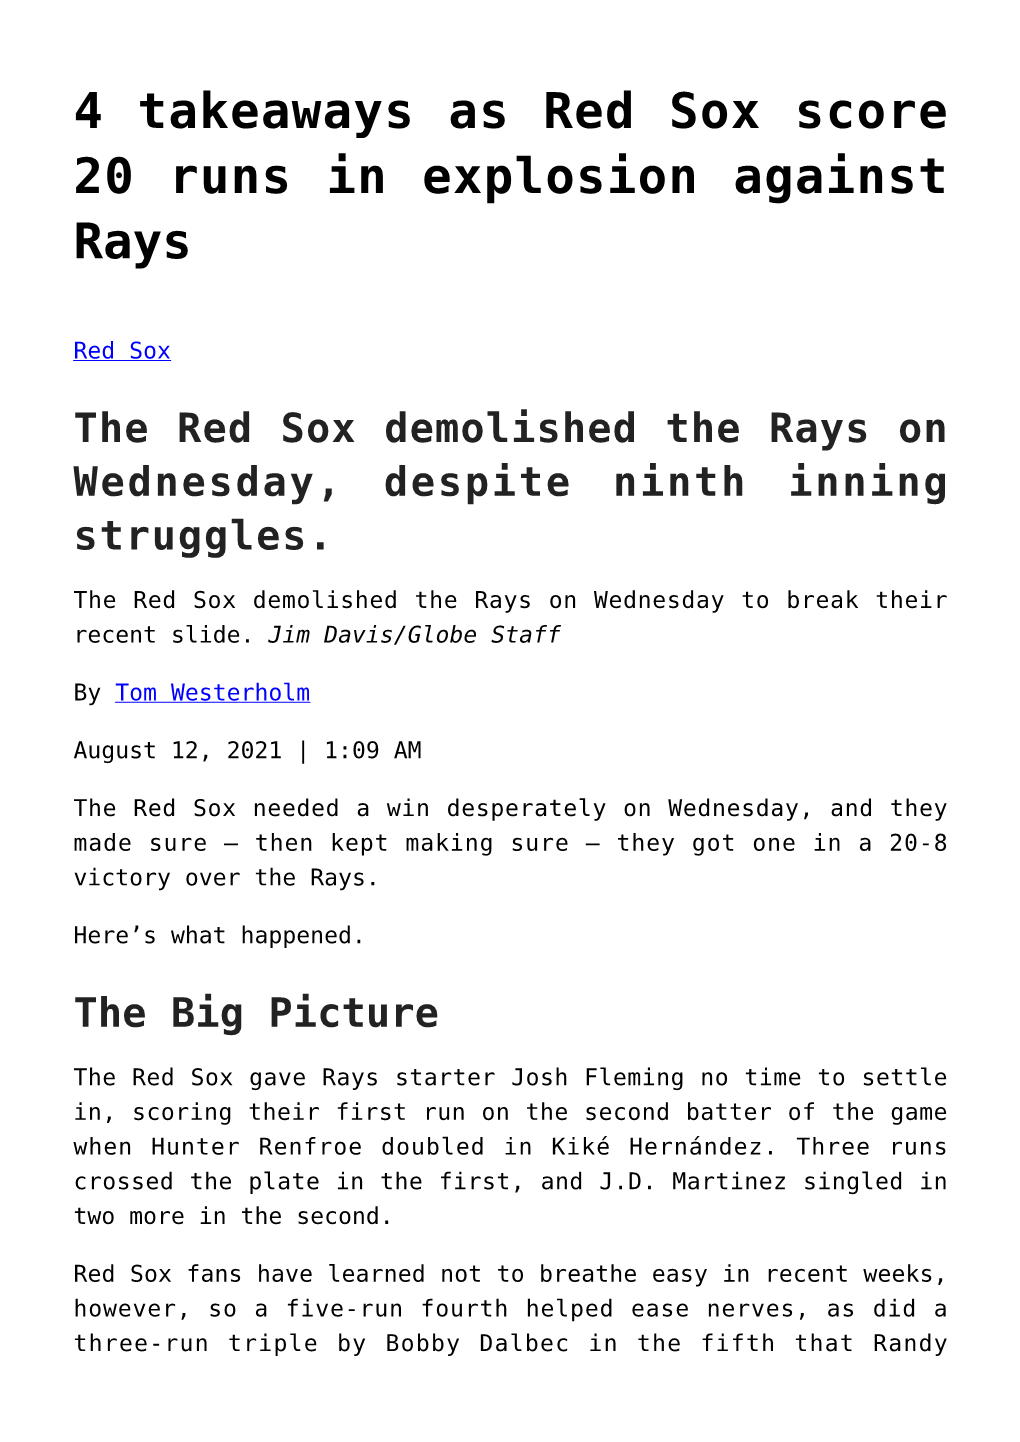 4 Takeaways As Red Sox Score 20 Runs in Explosion Against Rays